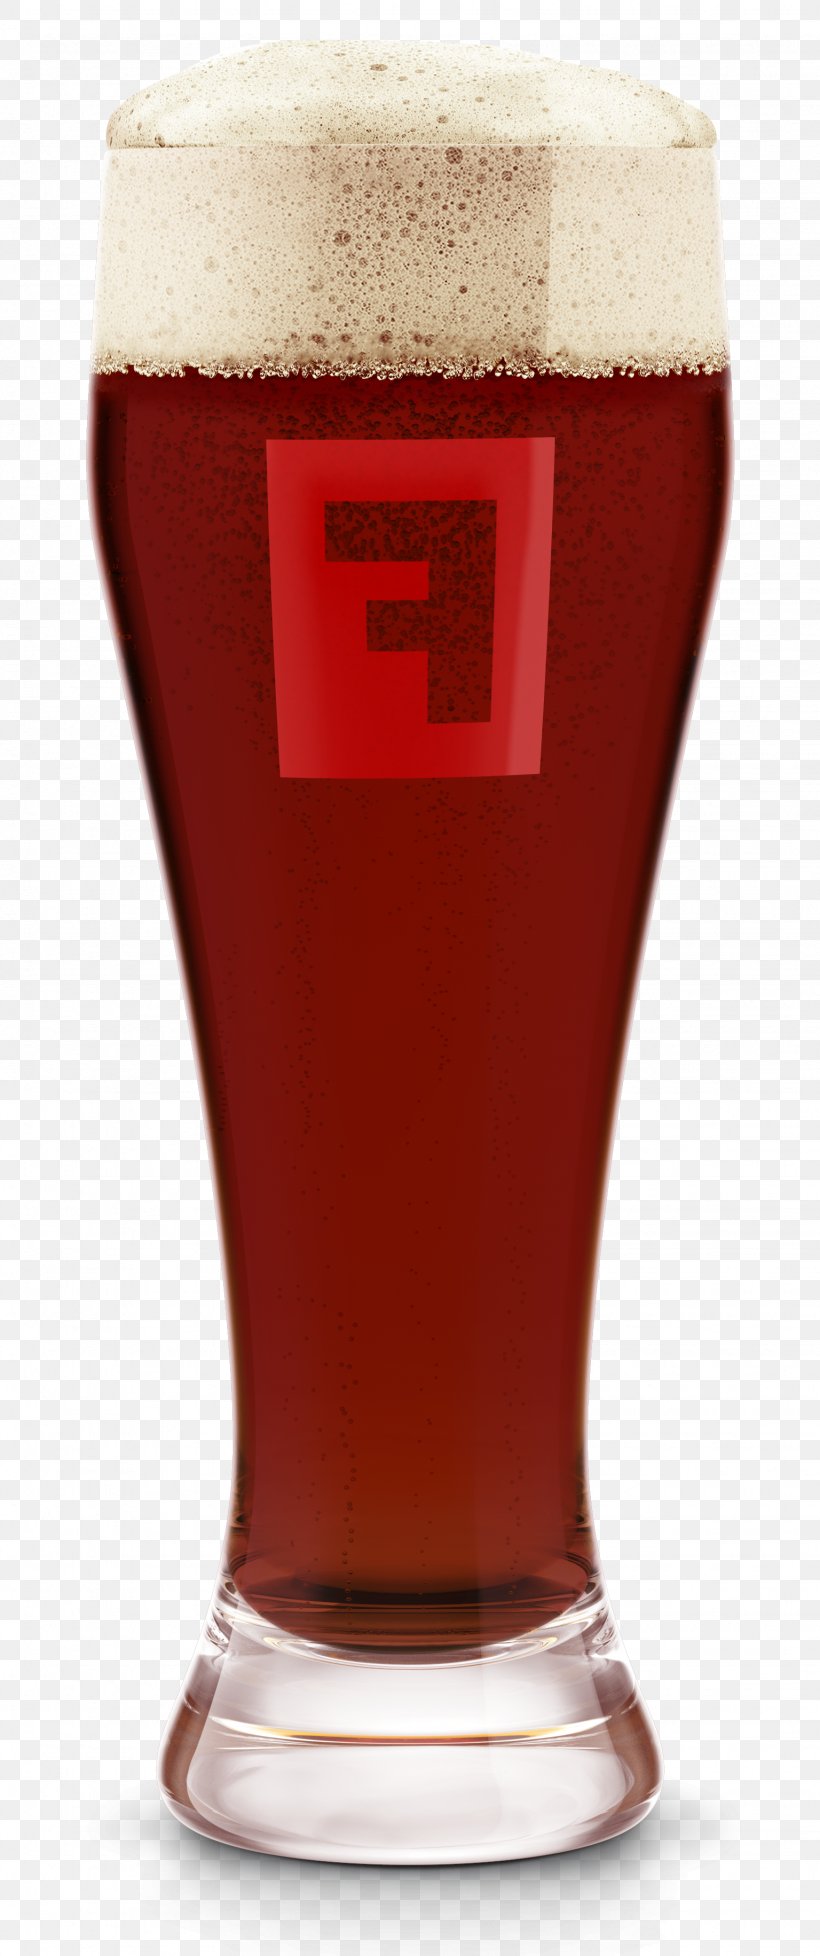 Beer Fullsteam Brewery Pint Glass Vienna Lager, PNG, 1536x3664px, Beer, Beer Glass, Brewery, Chestnut, Drink Download Free